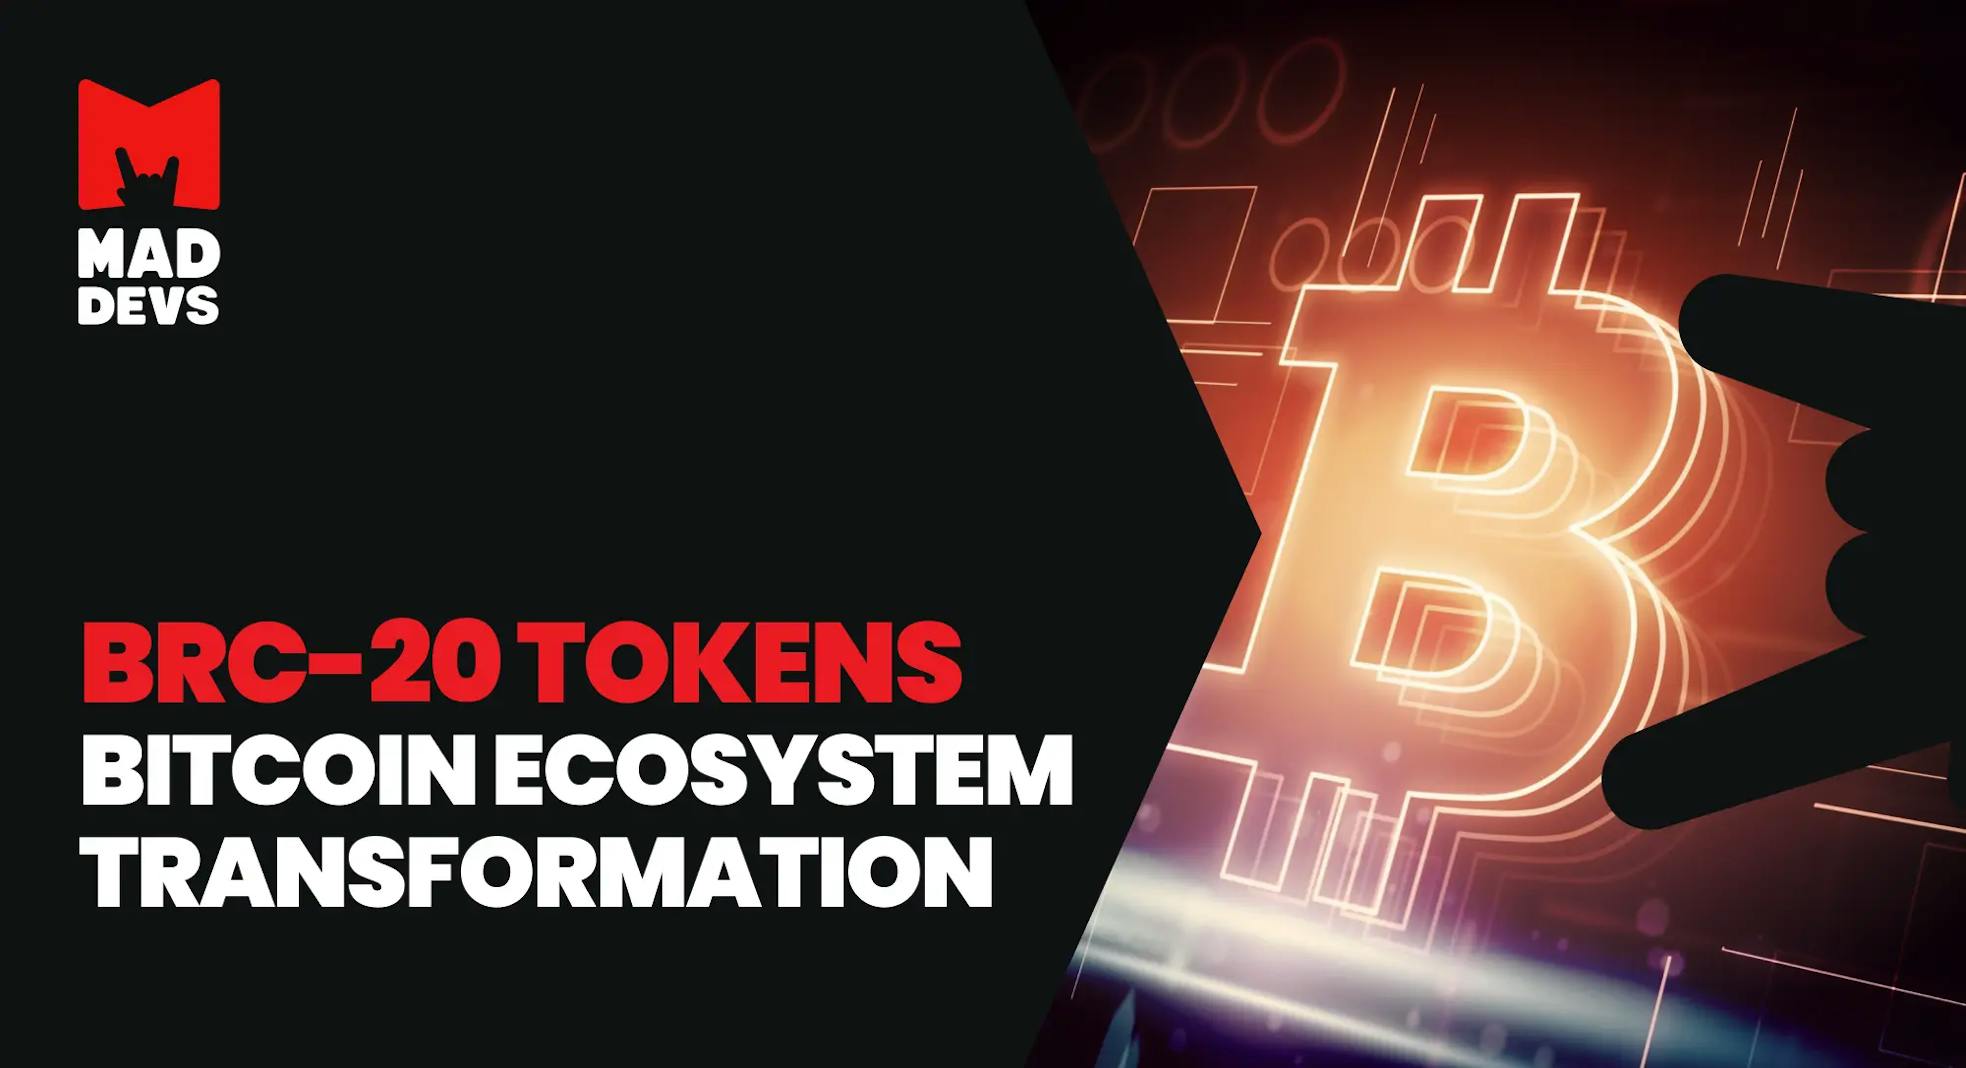 BRC-20 Tokens: The Transformation of the Bitcoin Ecosystem